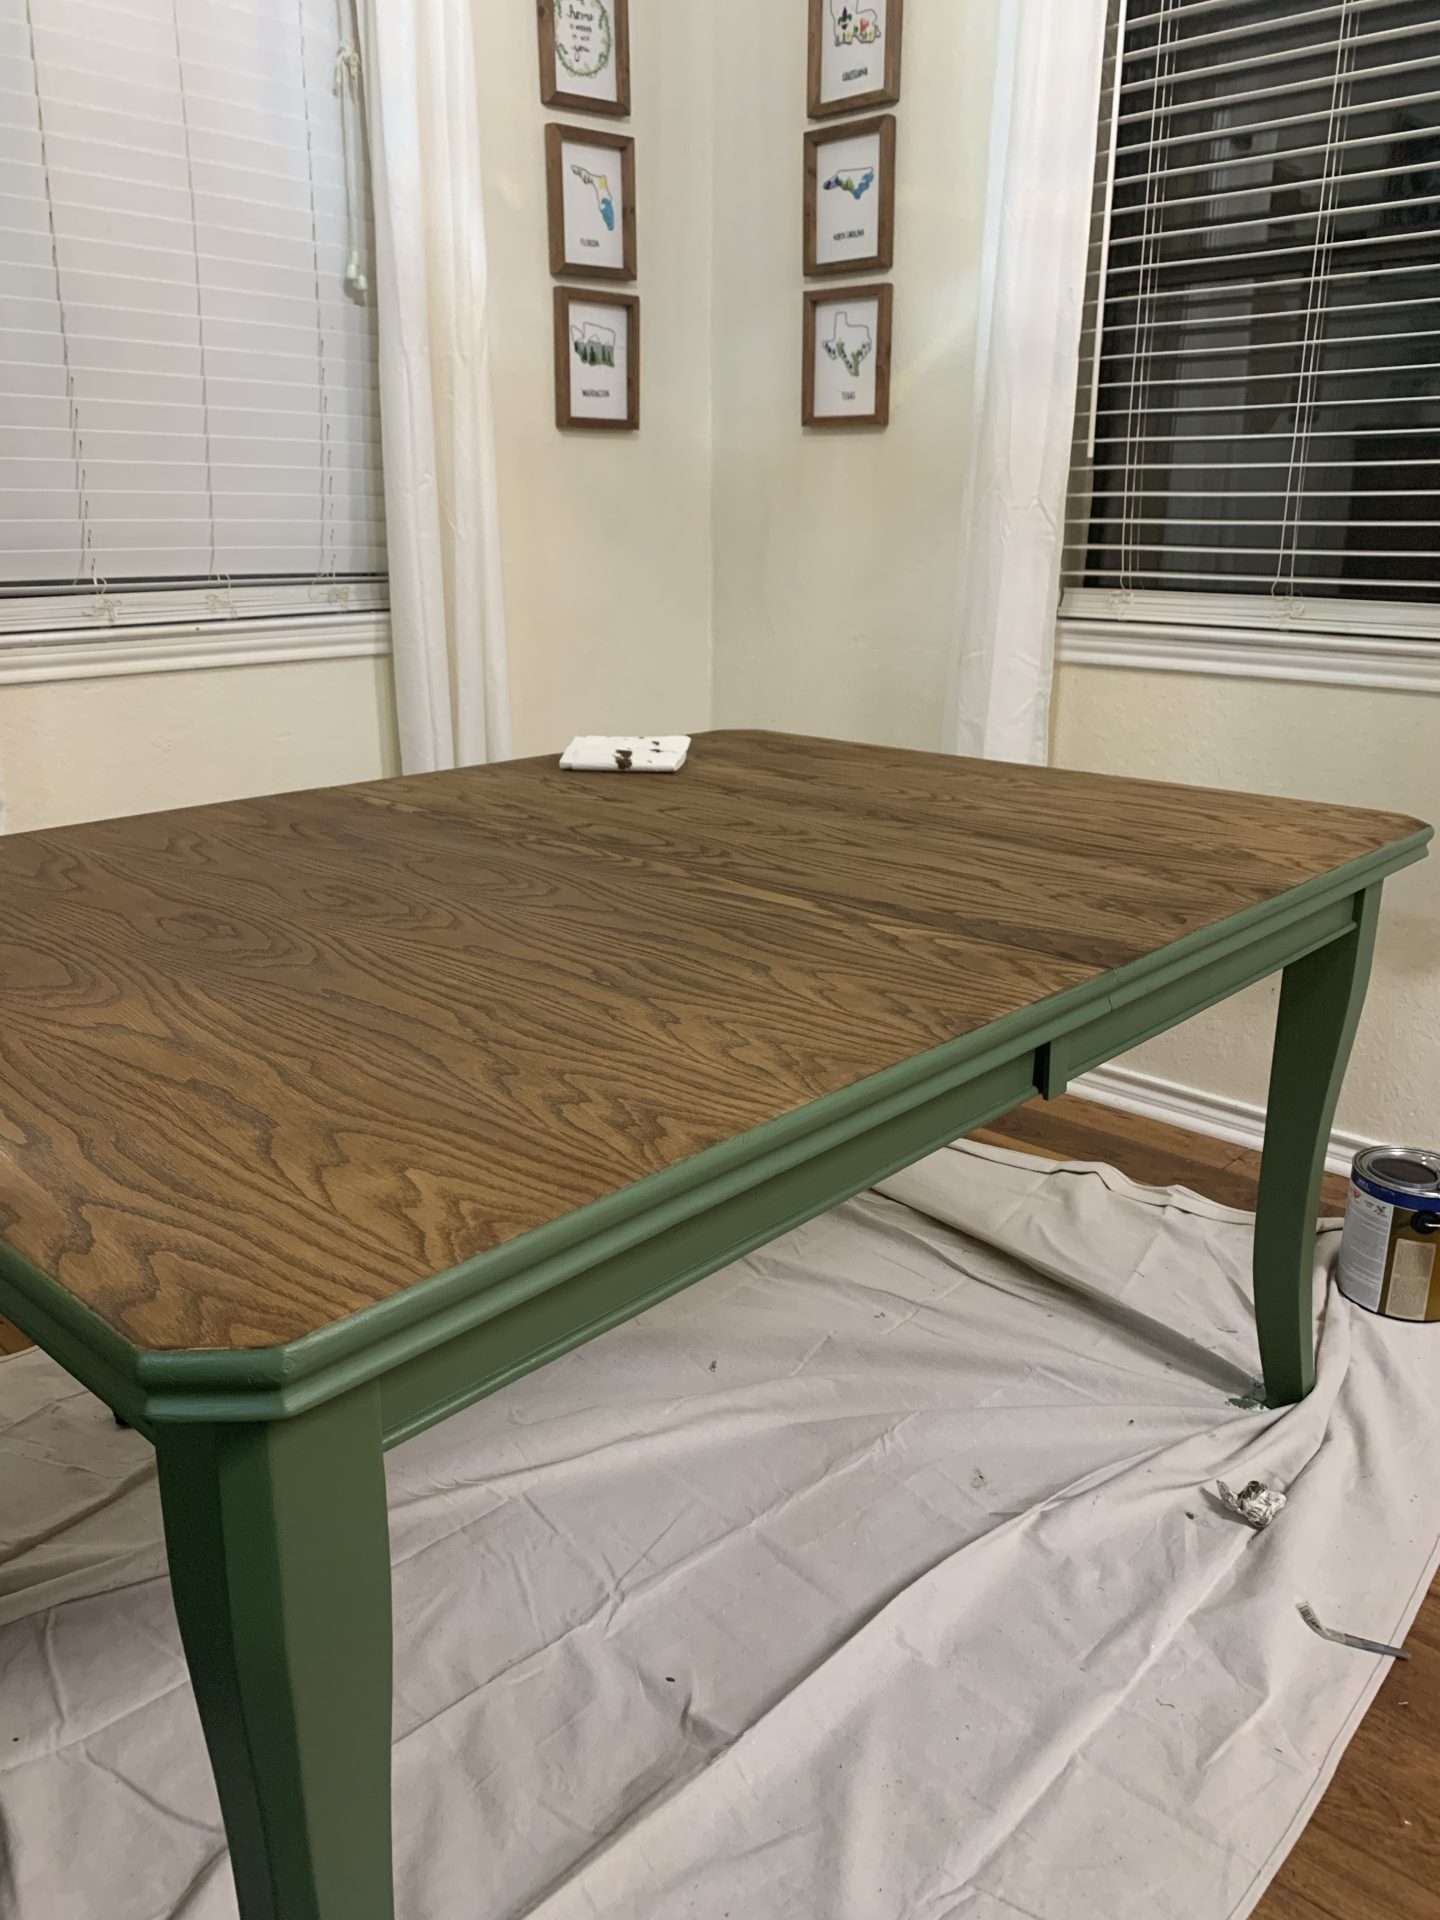 After adding stain to the dining room table.